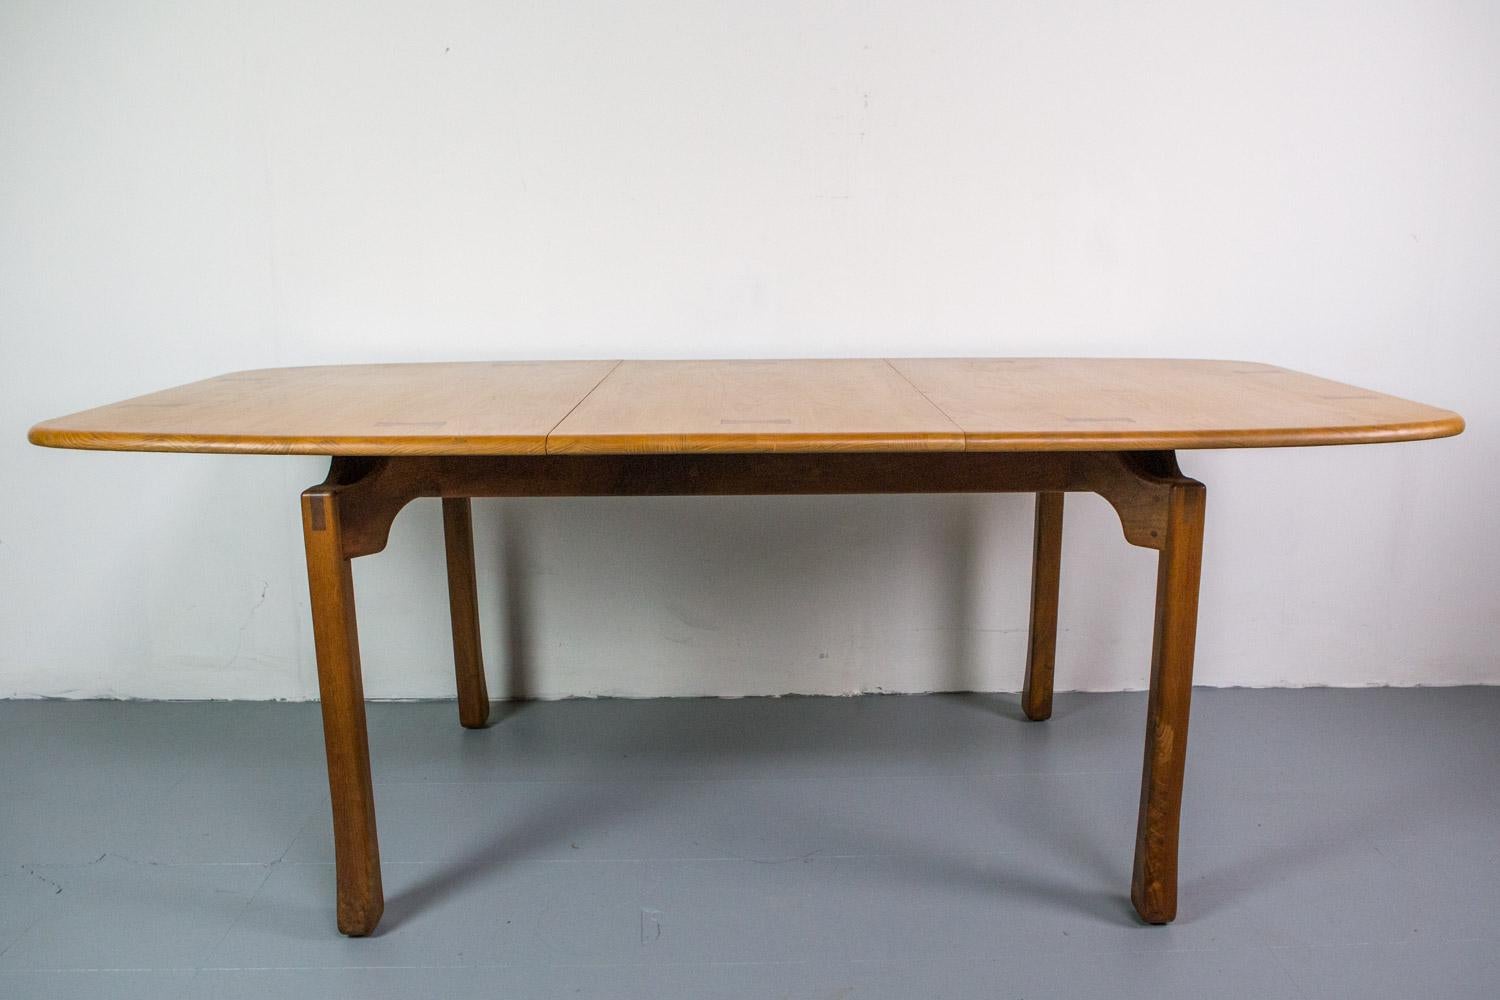 Woodworking Studio dining or leaftable designed by Woodworker Ejnar Pagh. Highend American crafts studio furniture.
The measurements is with leaf.
Length of extra leaf is 20.75 in.